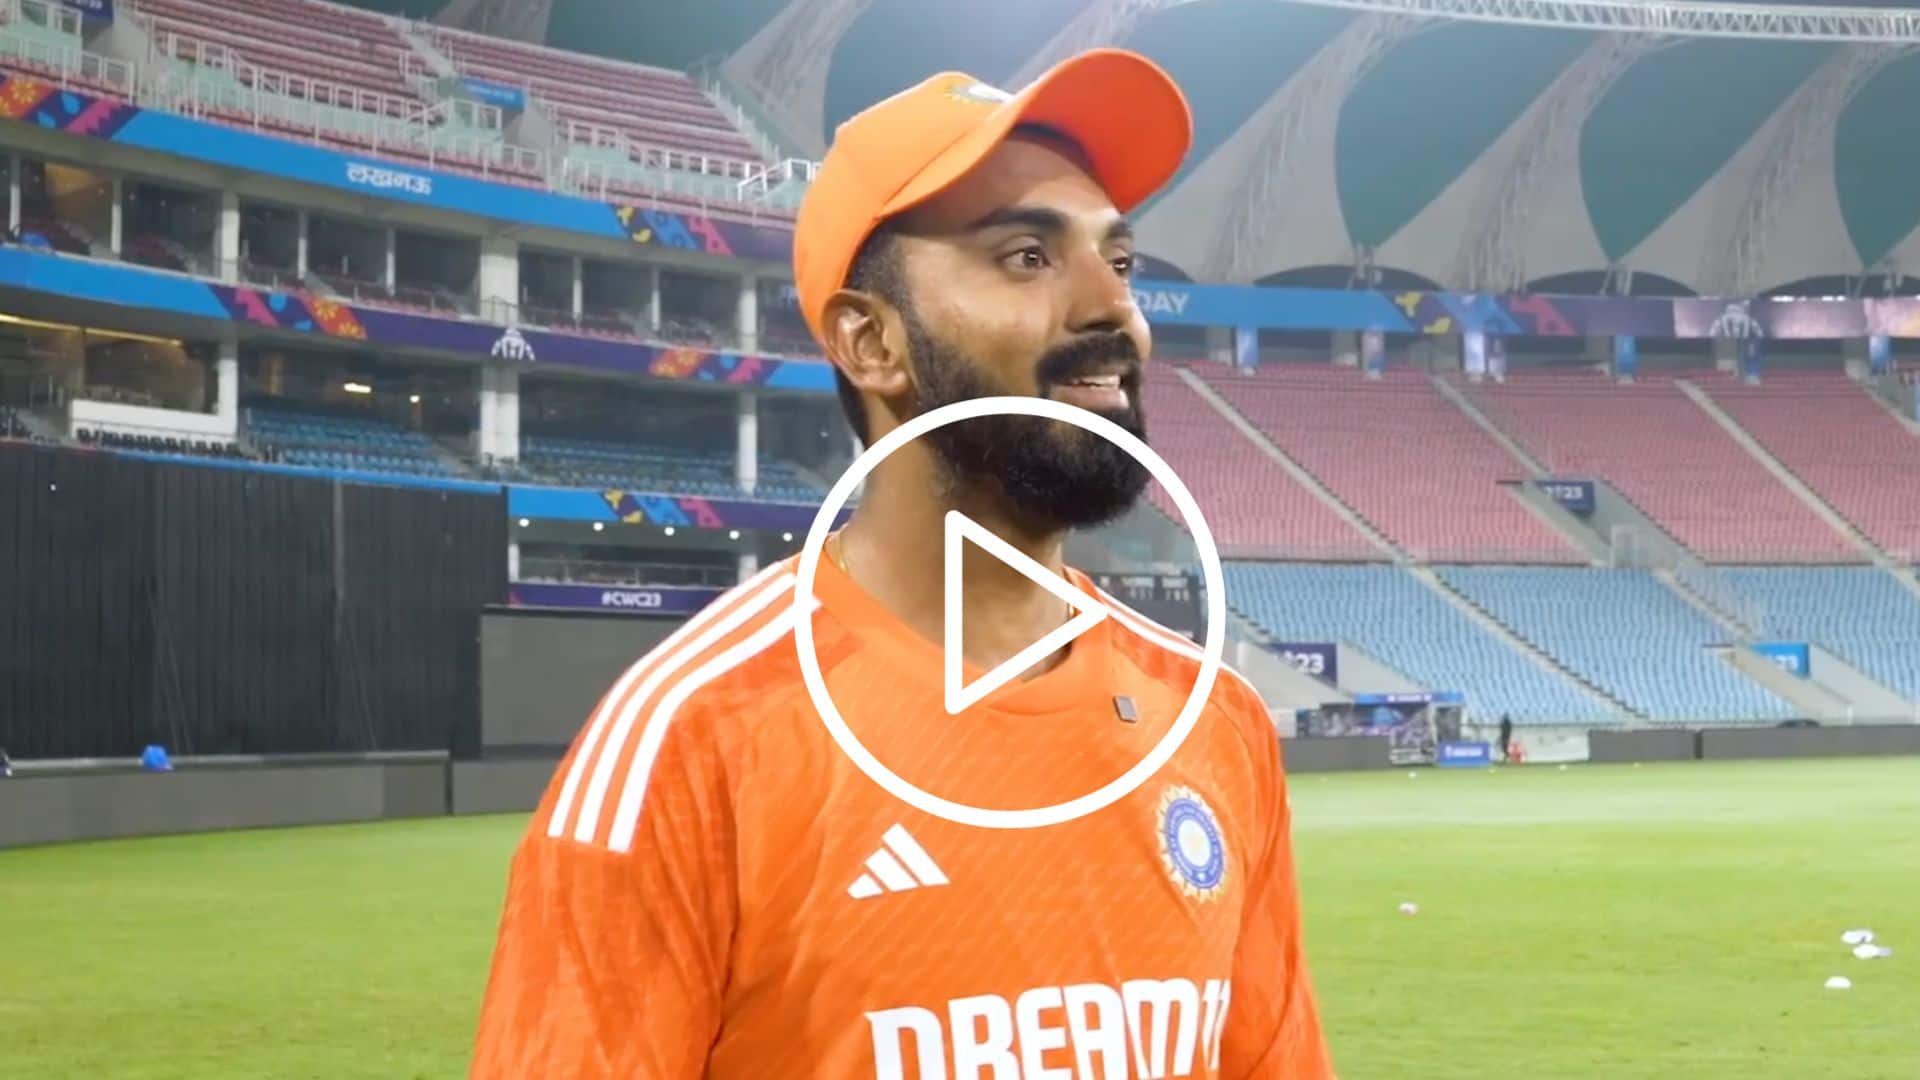 [Watch] 'My Heart Is Racing'- KL Rahul Recalls IPL Injury Ahead Of ENG Clash At Lucknow